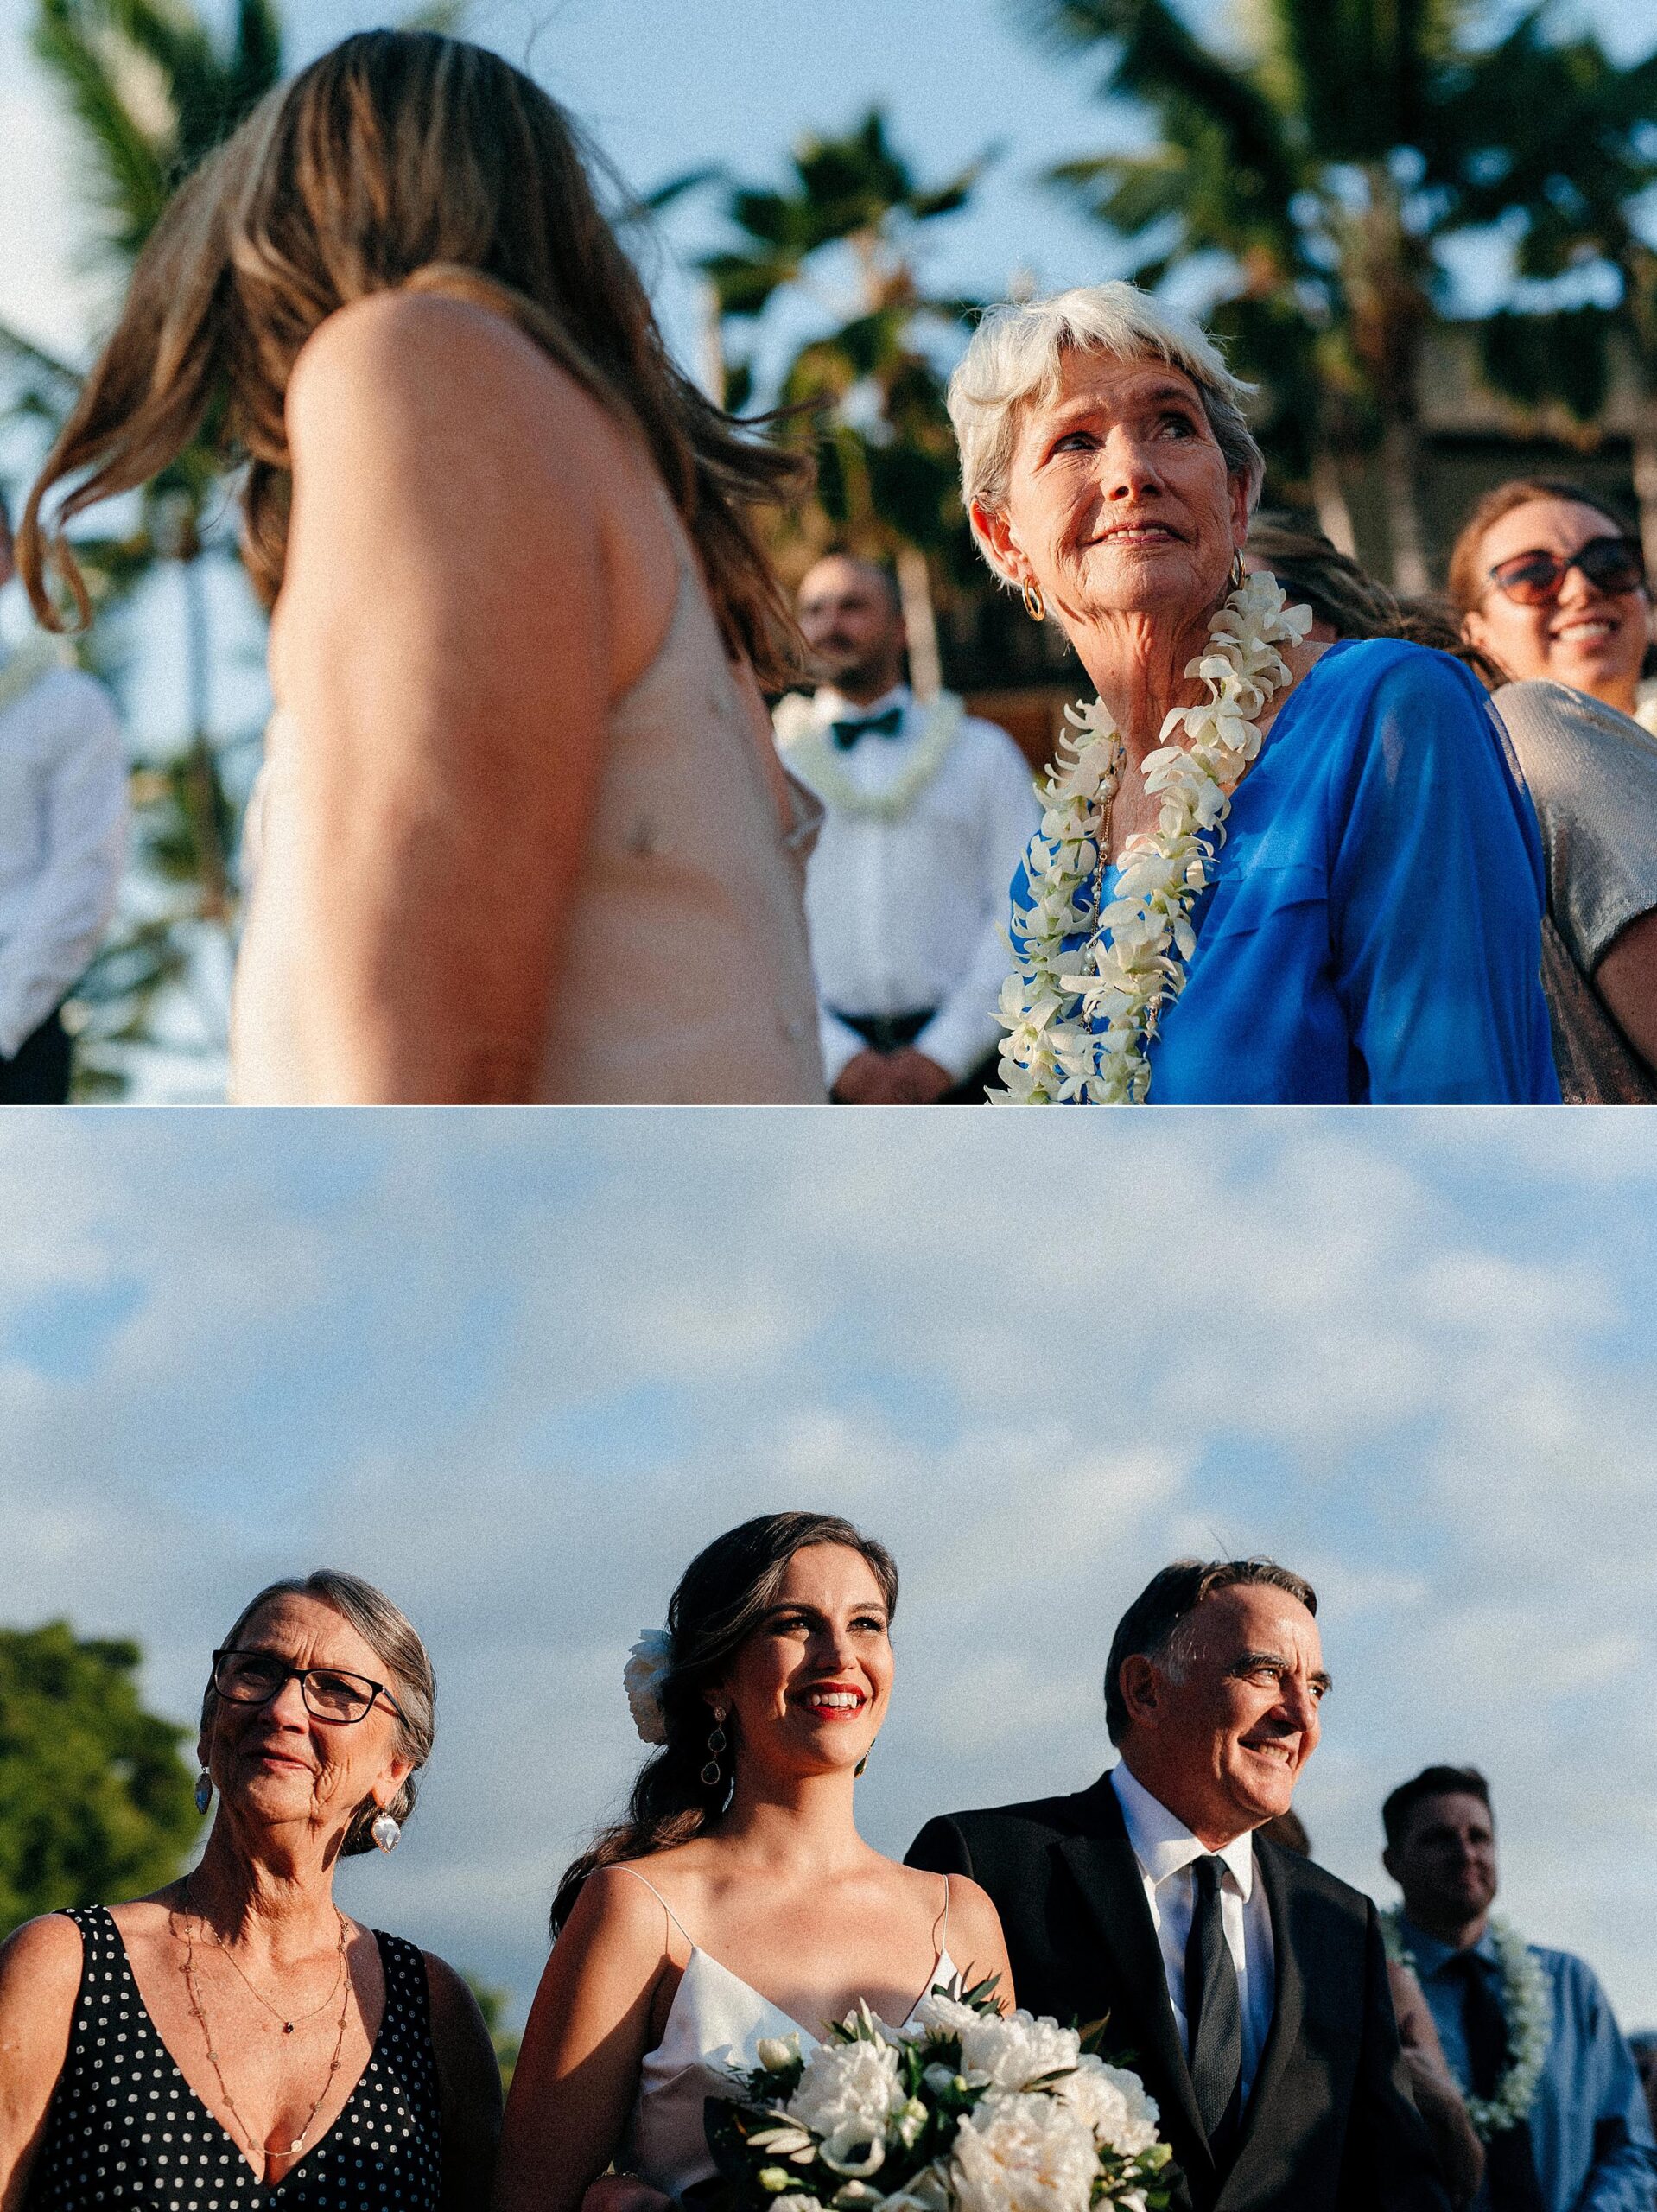 Kona-Big-Island-Hawaii-New-Years-Eve-Wedding-with-Ceremony-at-Living-Stones-Church-and-Reception-at-Daylight-Mind-Coffee_0011.jpg